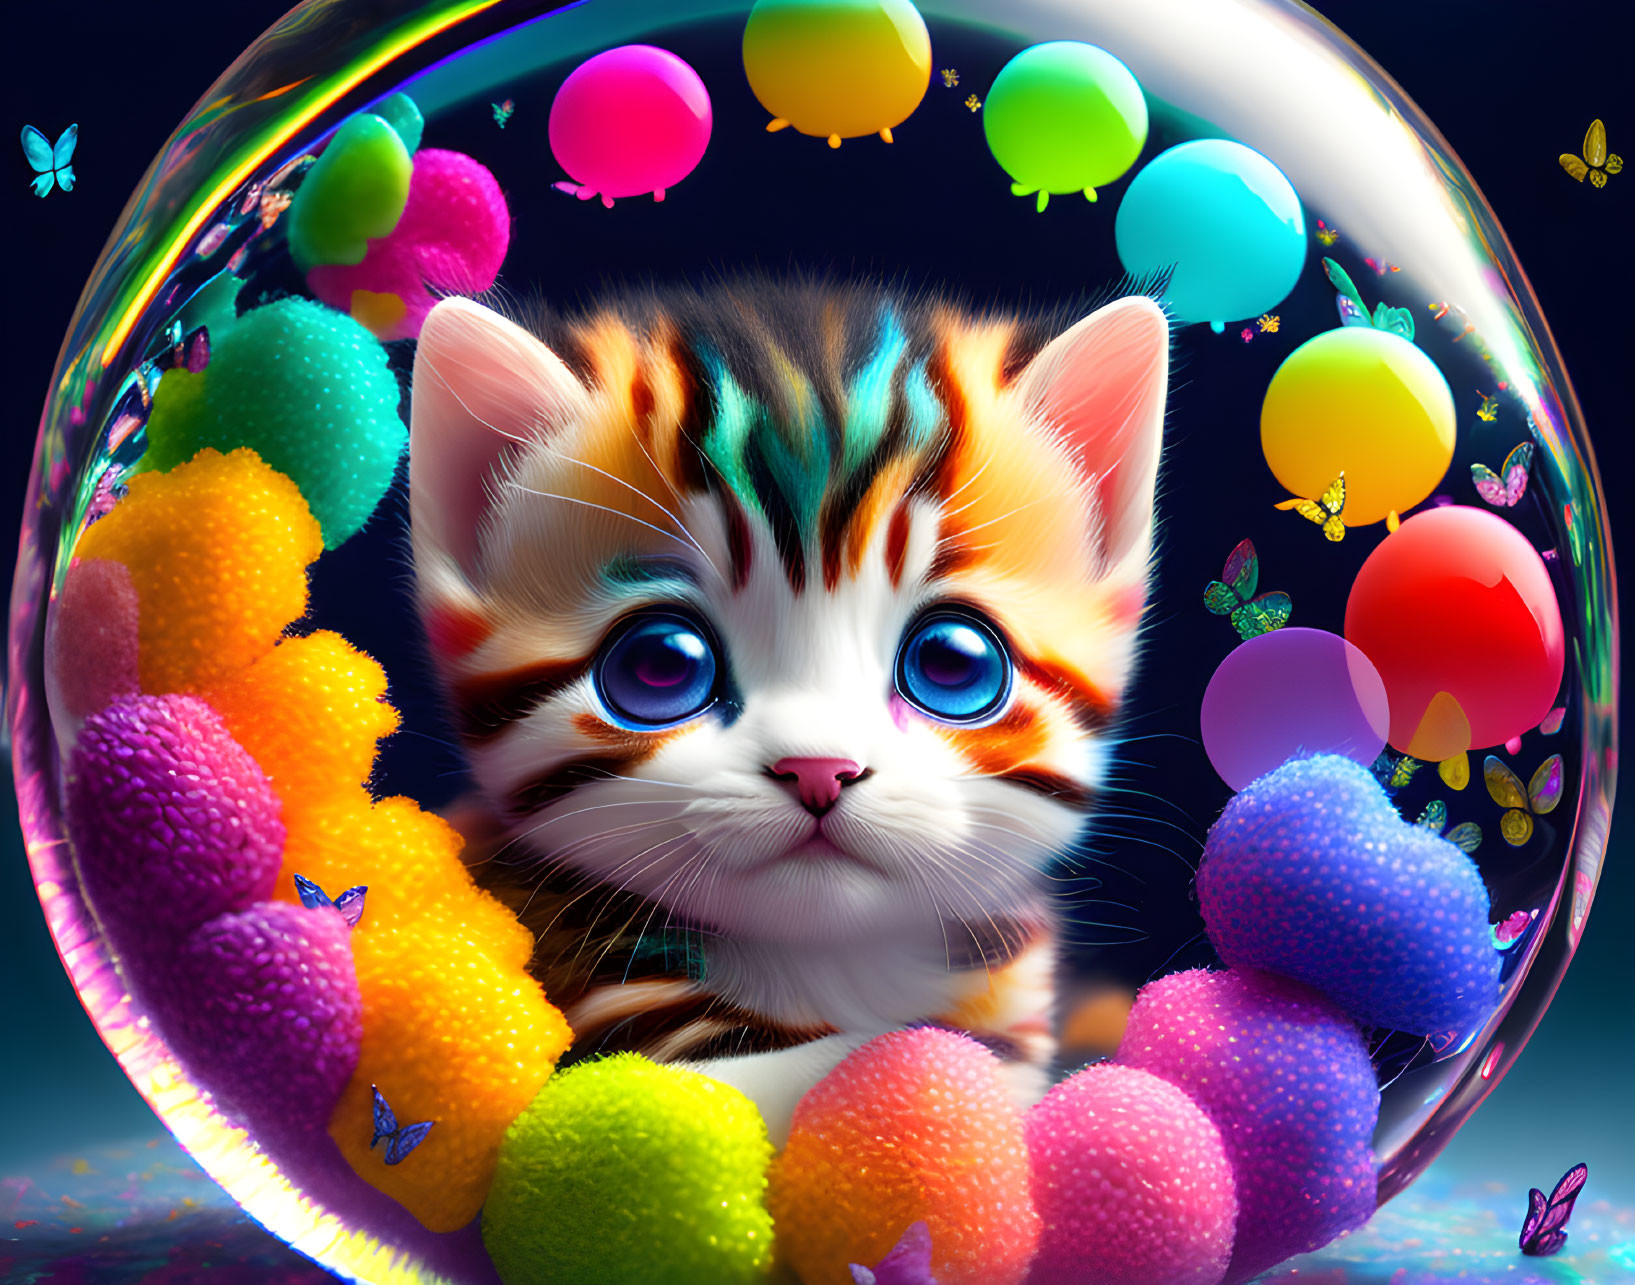 Colorful Fantastical Kitten with Blue Eyes and Spheres in Digital Art